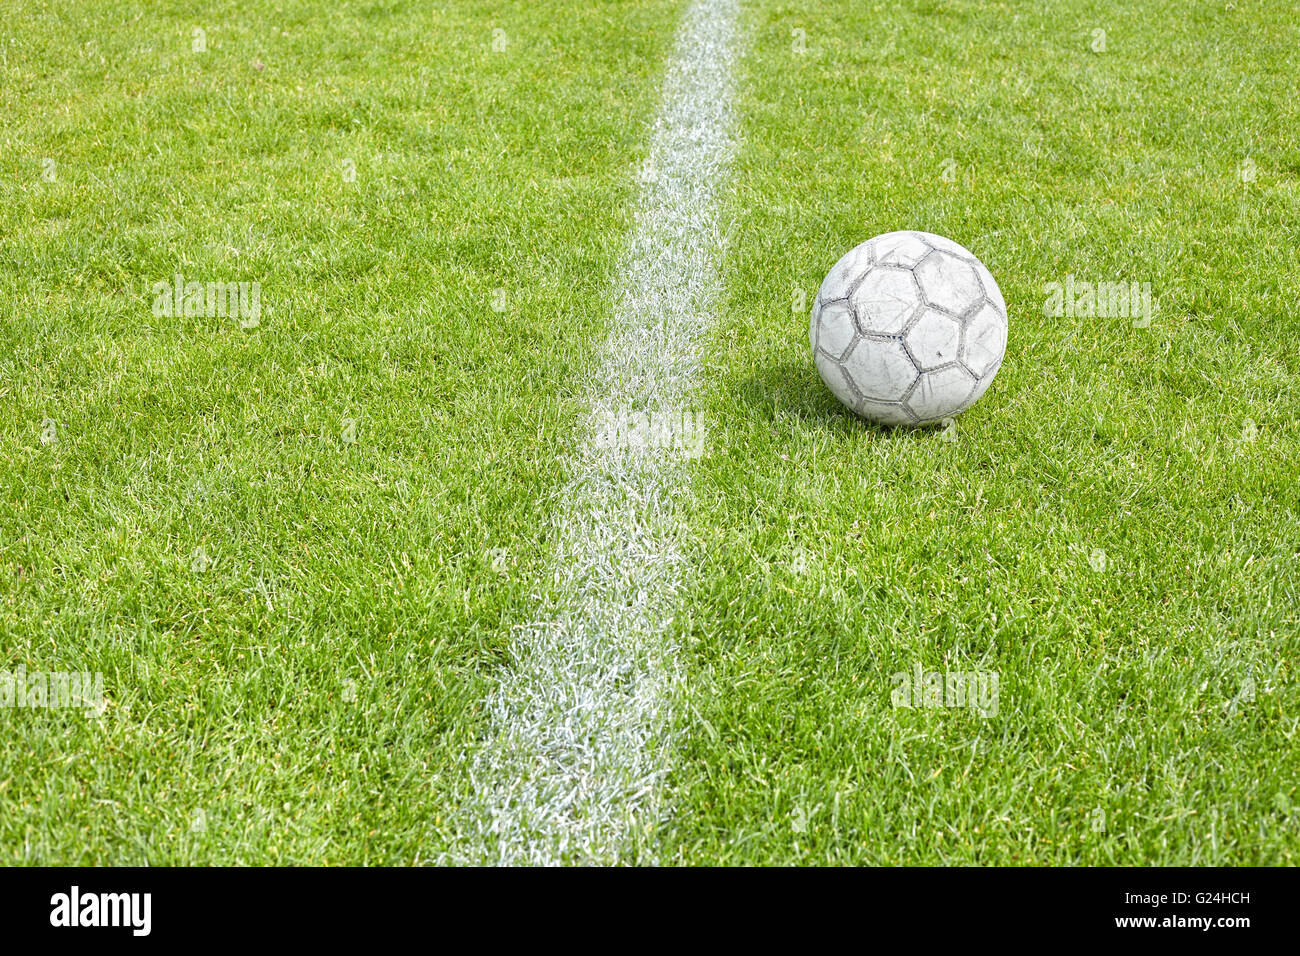 Used soccer ball on grass by a sideline, space for text, shallow depth of field. Stock Photo